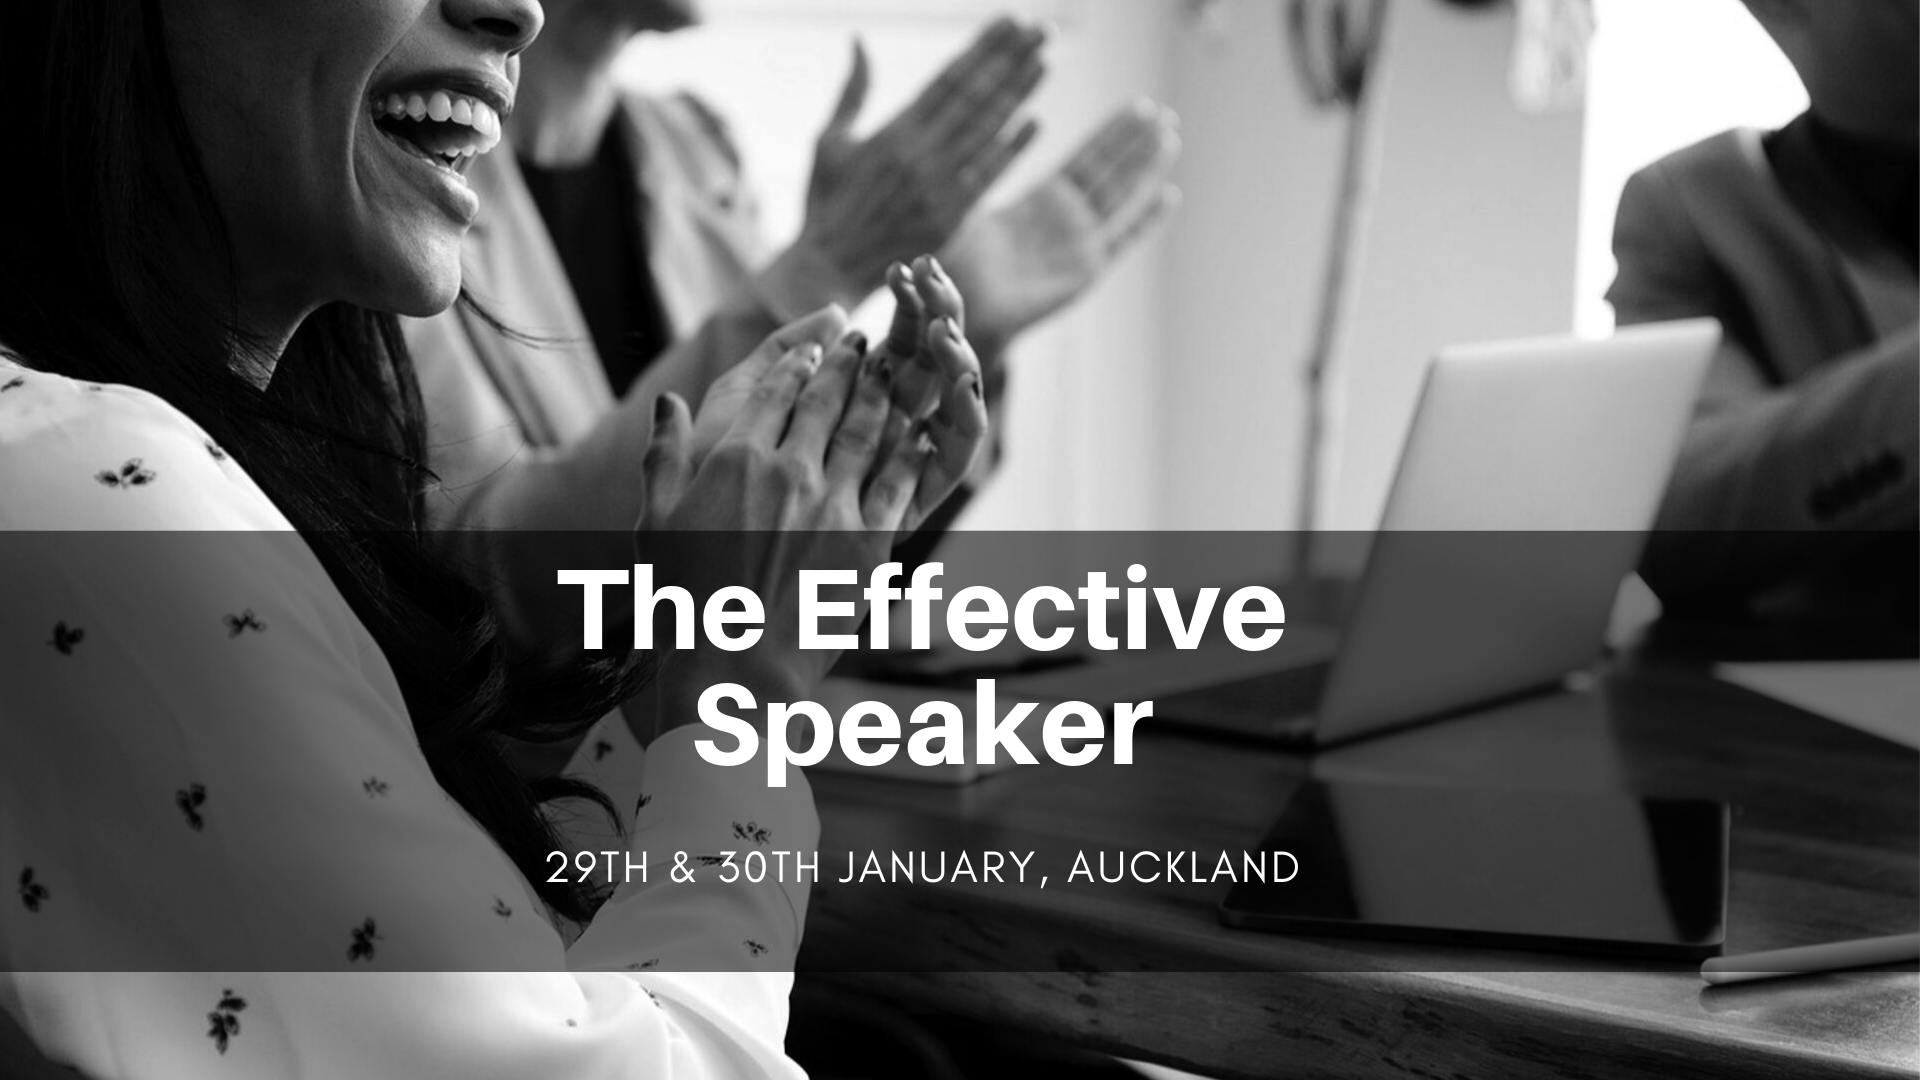 The Effective Speaker - Auckland 29th & 30th January